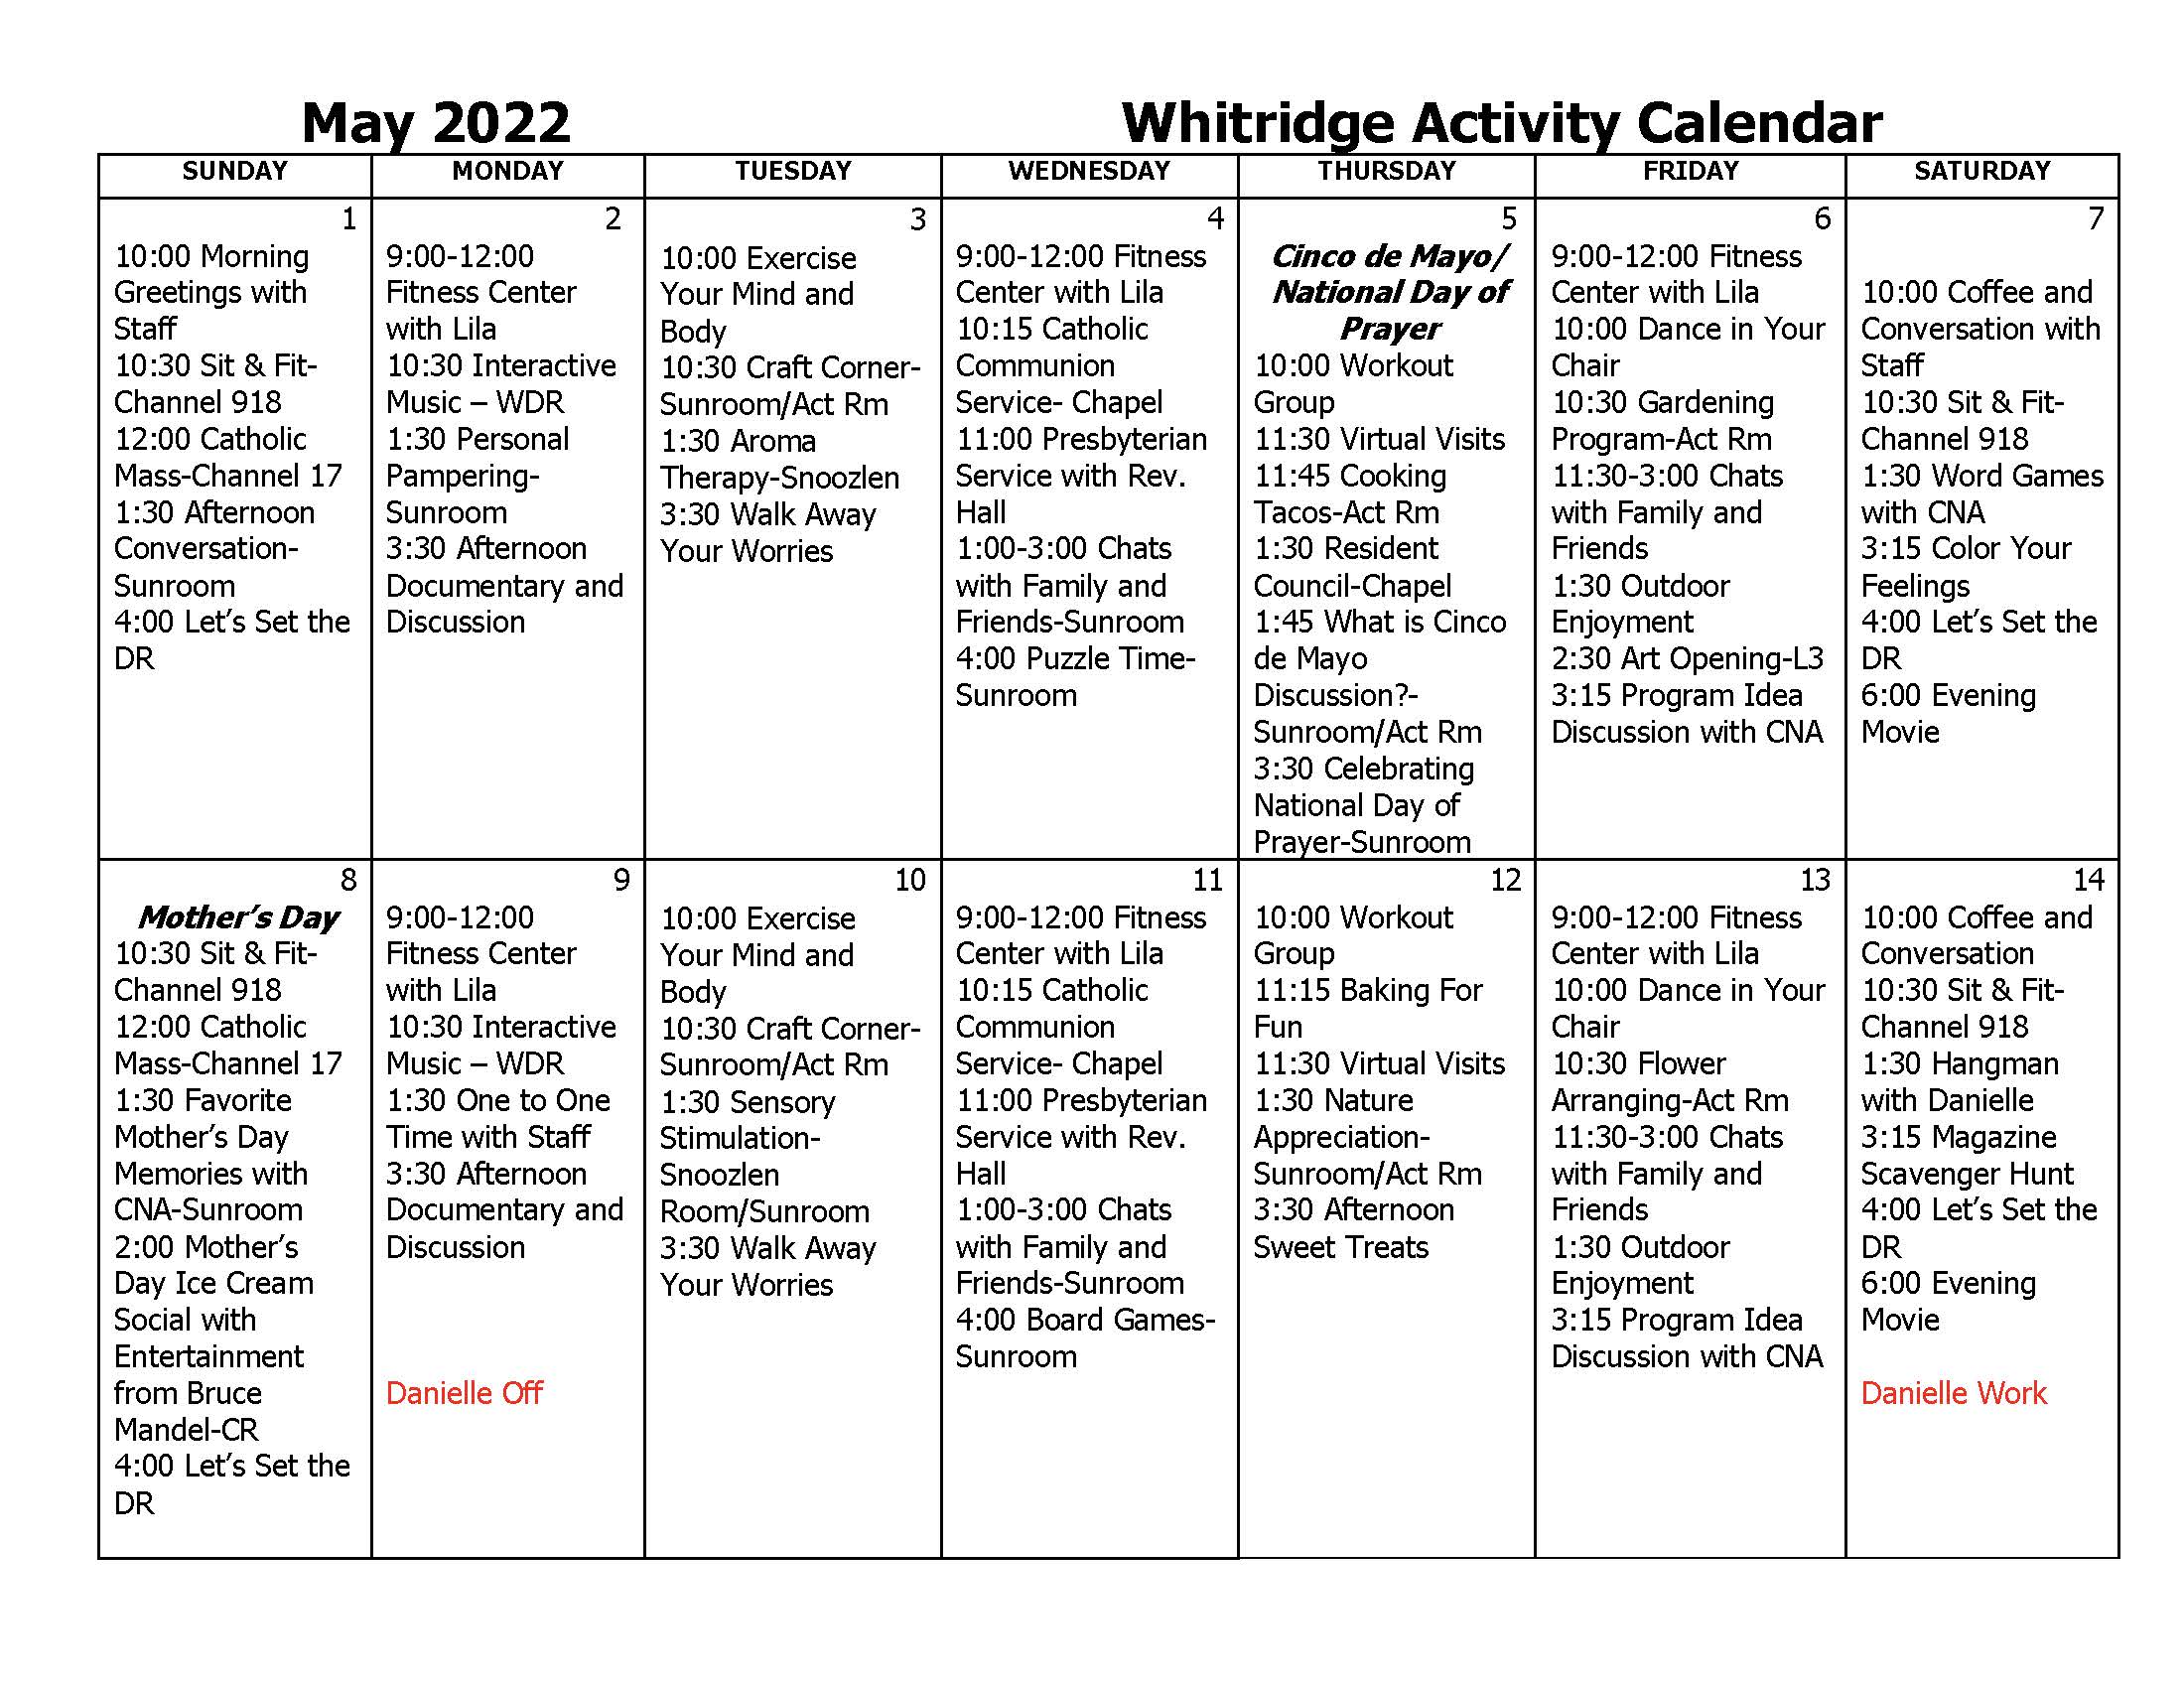 May 2022 Whit. Activity Calendar_Page_1